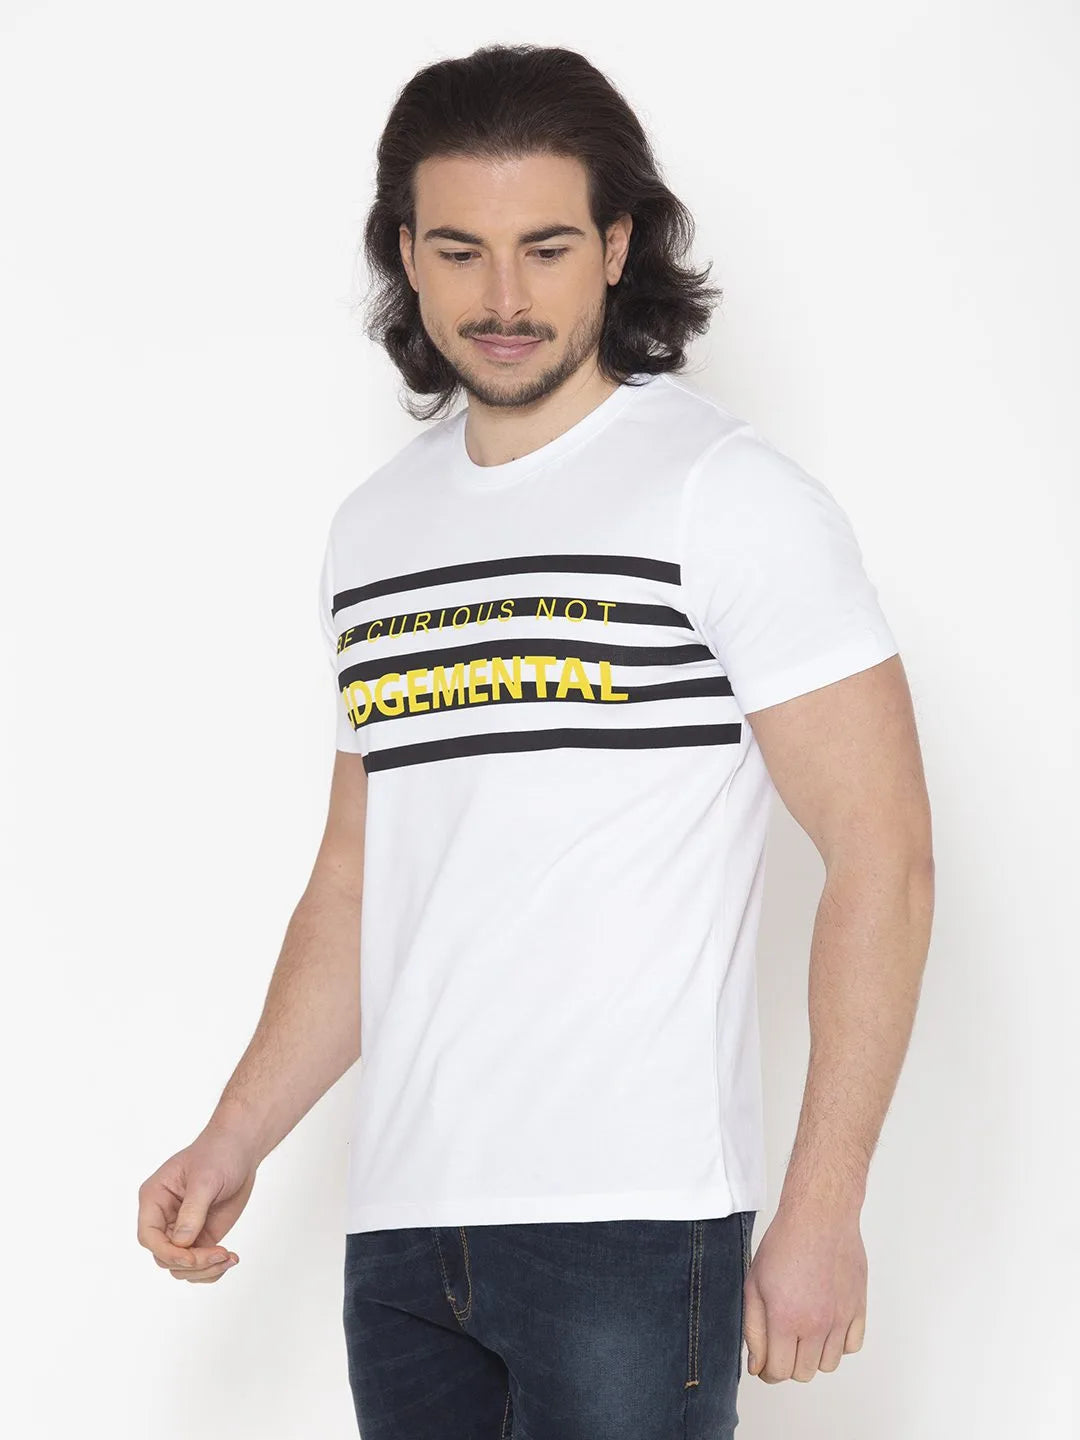 White Graphic Men T-shirt Being Flawless